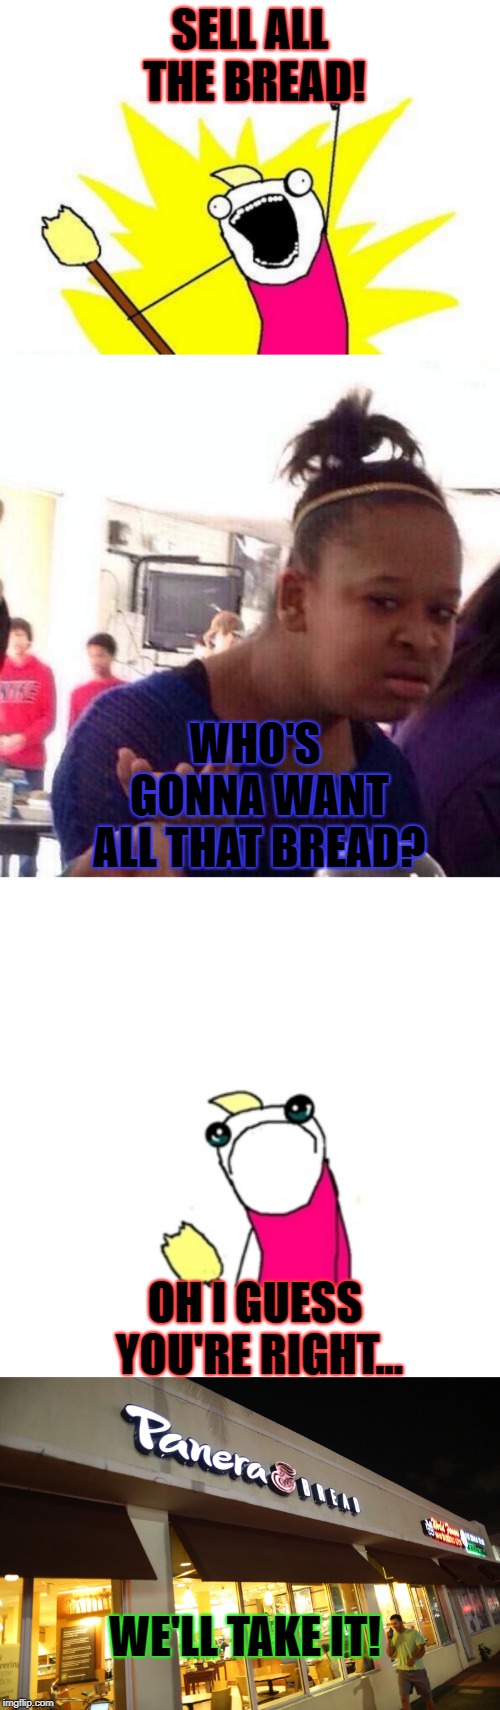 Panera will buy ALL the bread | SELL ALL THE BREAD! WHO'S GONNA WANT ALL THAT BREAD? OH I GUESS YOU'RE RIGHT... WE'LL TAKE IT! | image tagged in memes,x all the y,sad x all the y,black girl wat | made w/ Imgflip meme maker